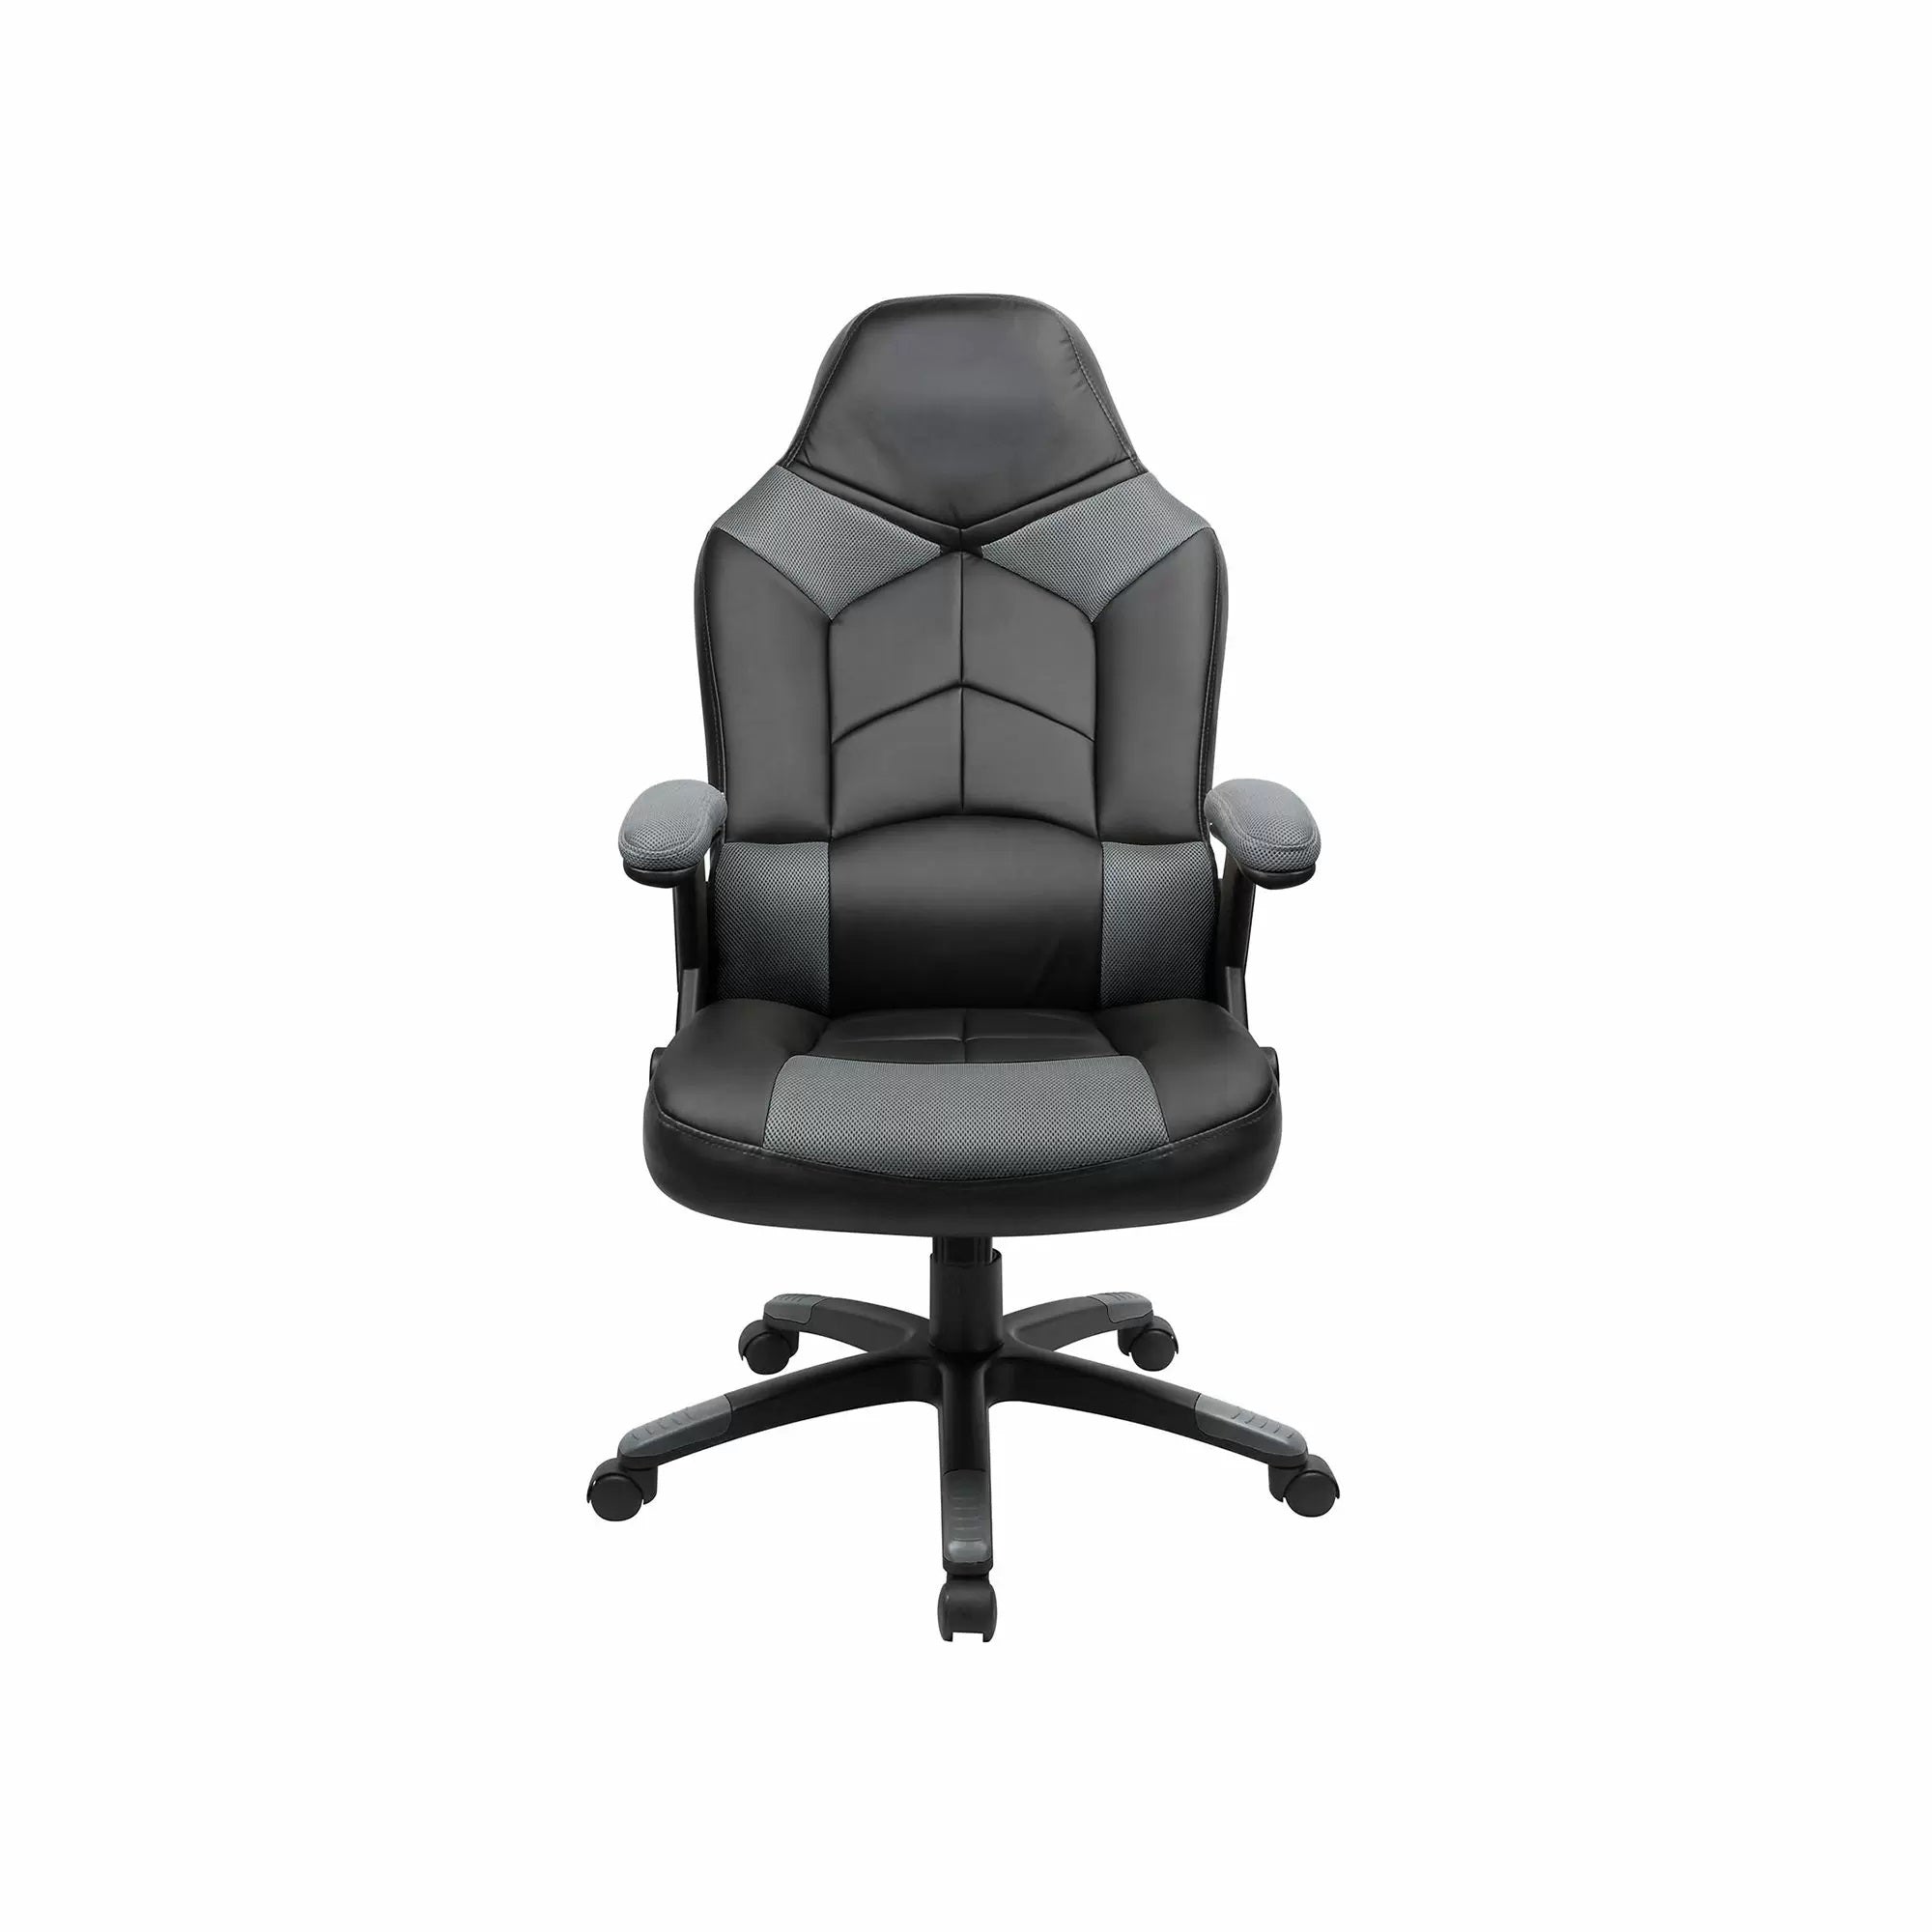 Imperial USA Oversized Video Gaming Chair Black Grey